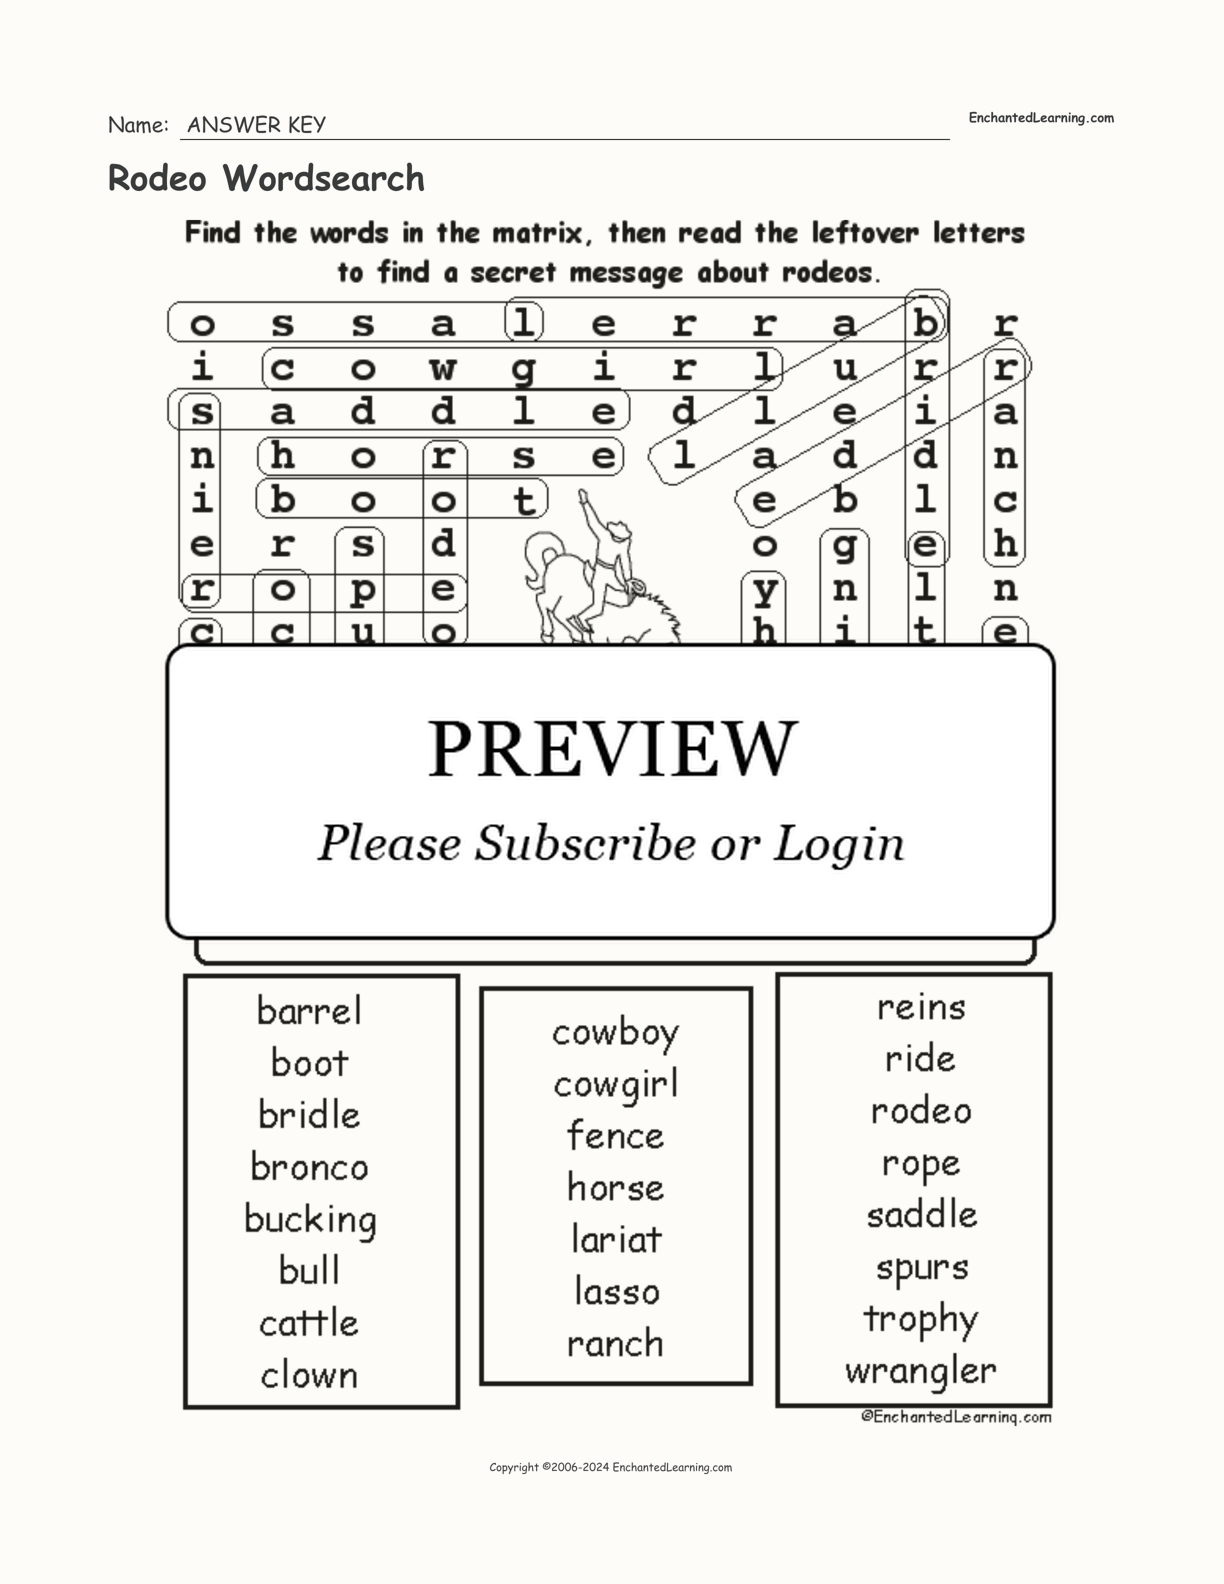 Rodeo Wordsearch interactive worksheet page 2